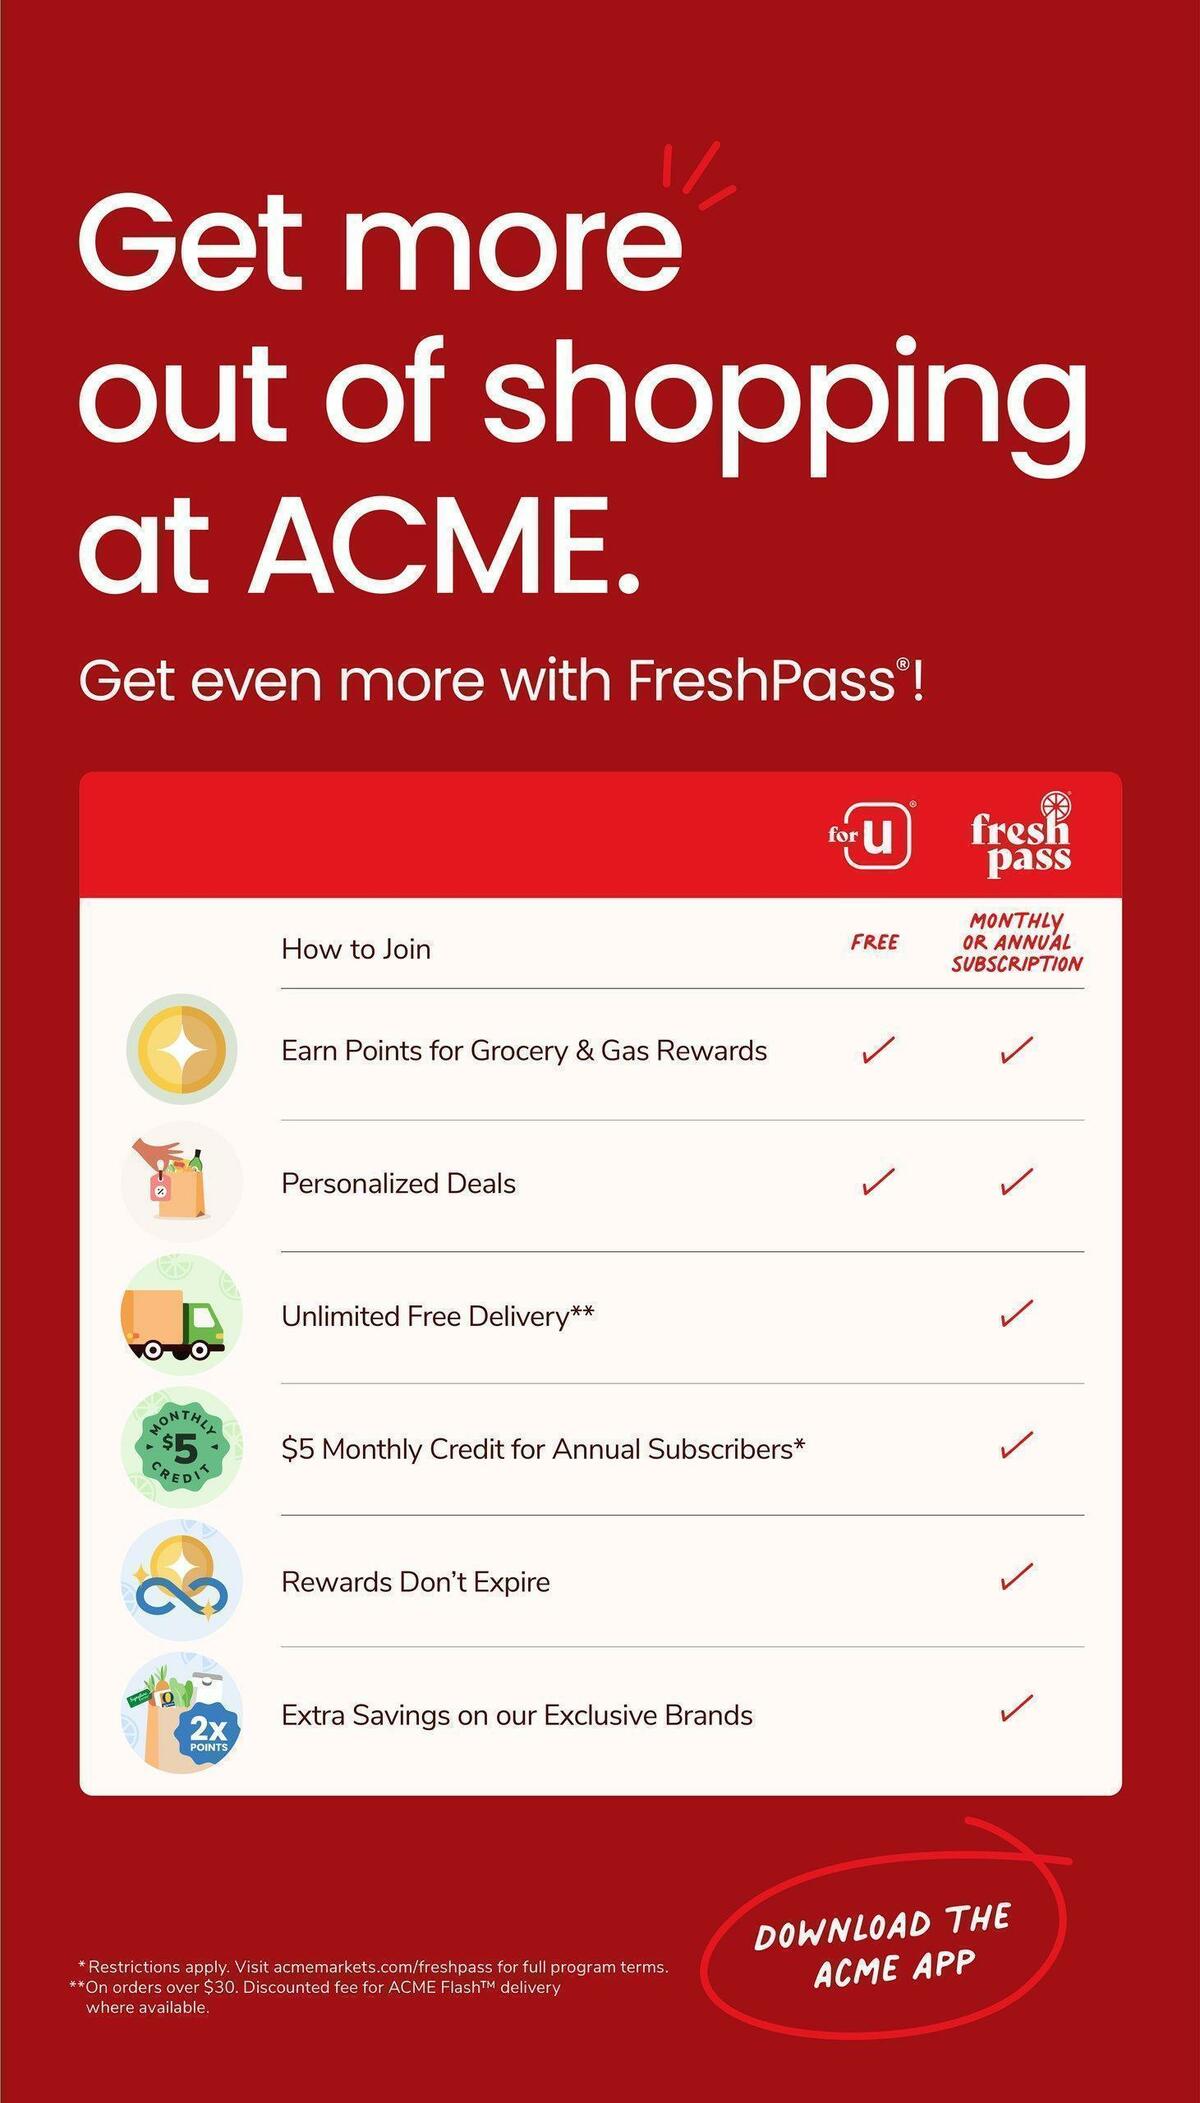 ACME Markets Weekly Ad from April 14